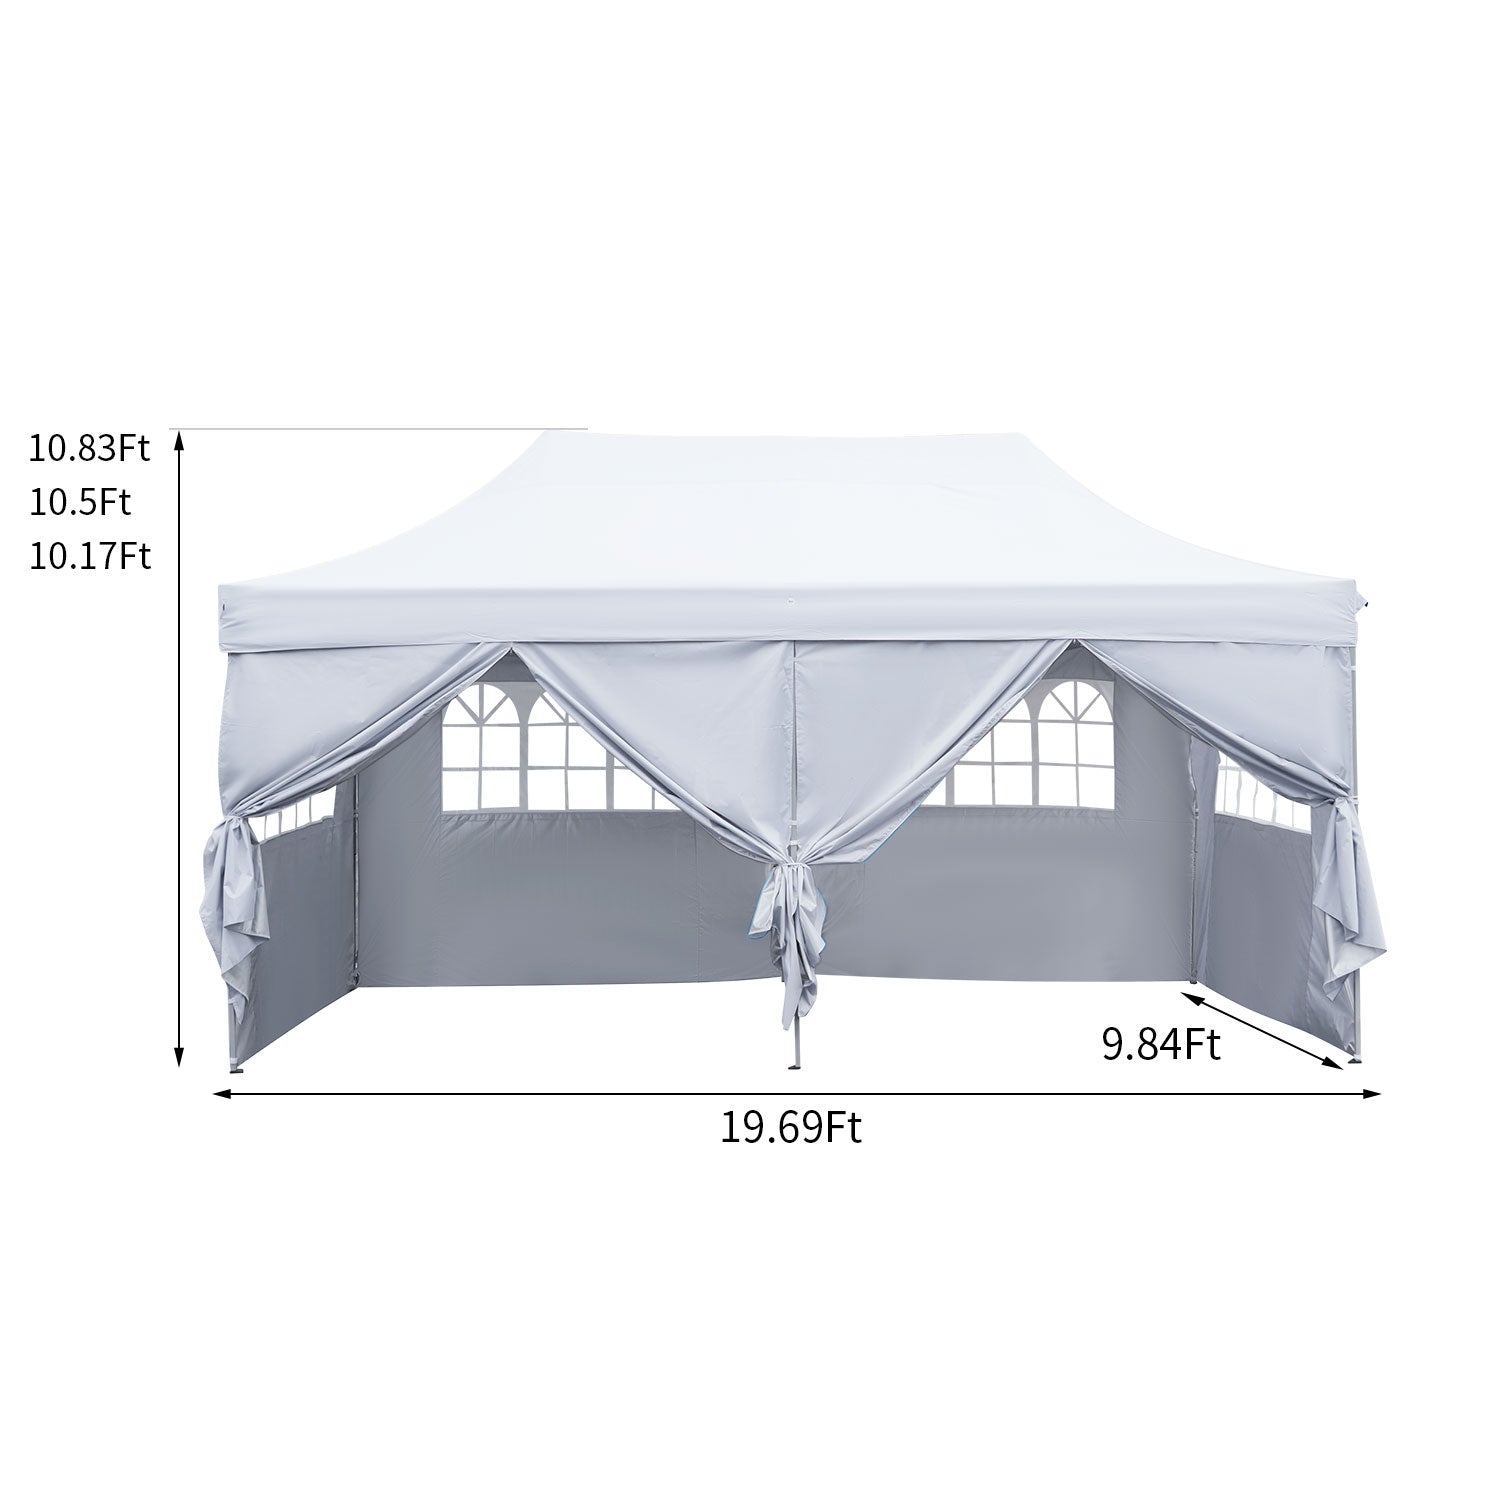 Outdoor Basic 10' x 20' Pop up Instant Canopies Tent with 6 Removable Sidewalls for Party Commercial Activity,White